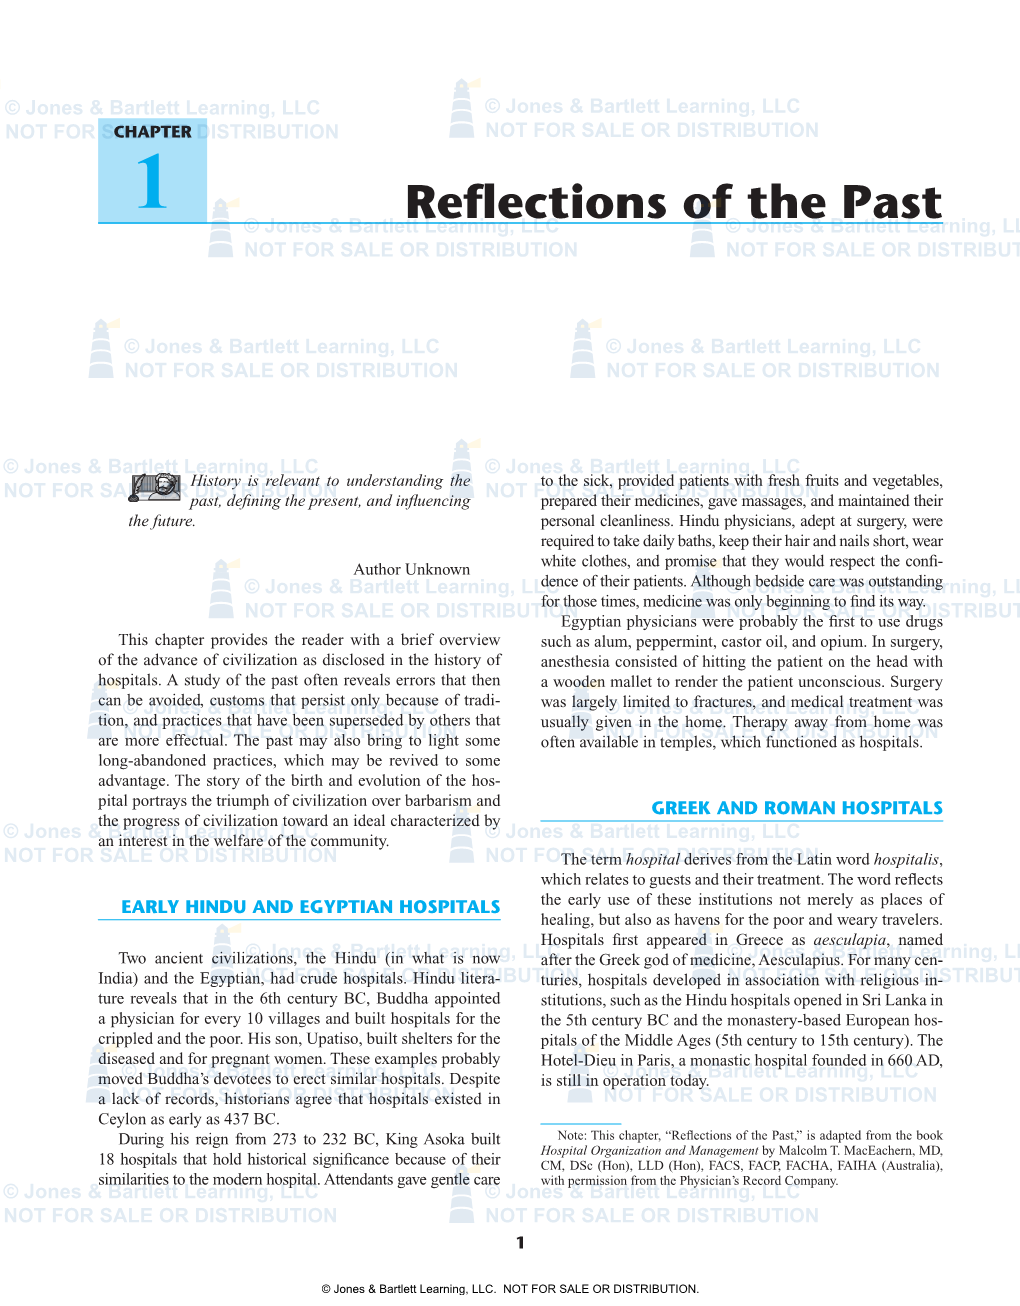 Reflections of the Past,” Is Adapted from the Book Hospital Organization and Management by Malcolm T